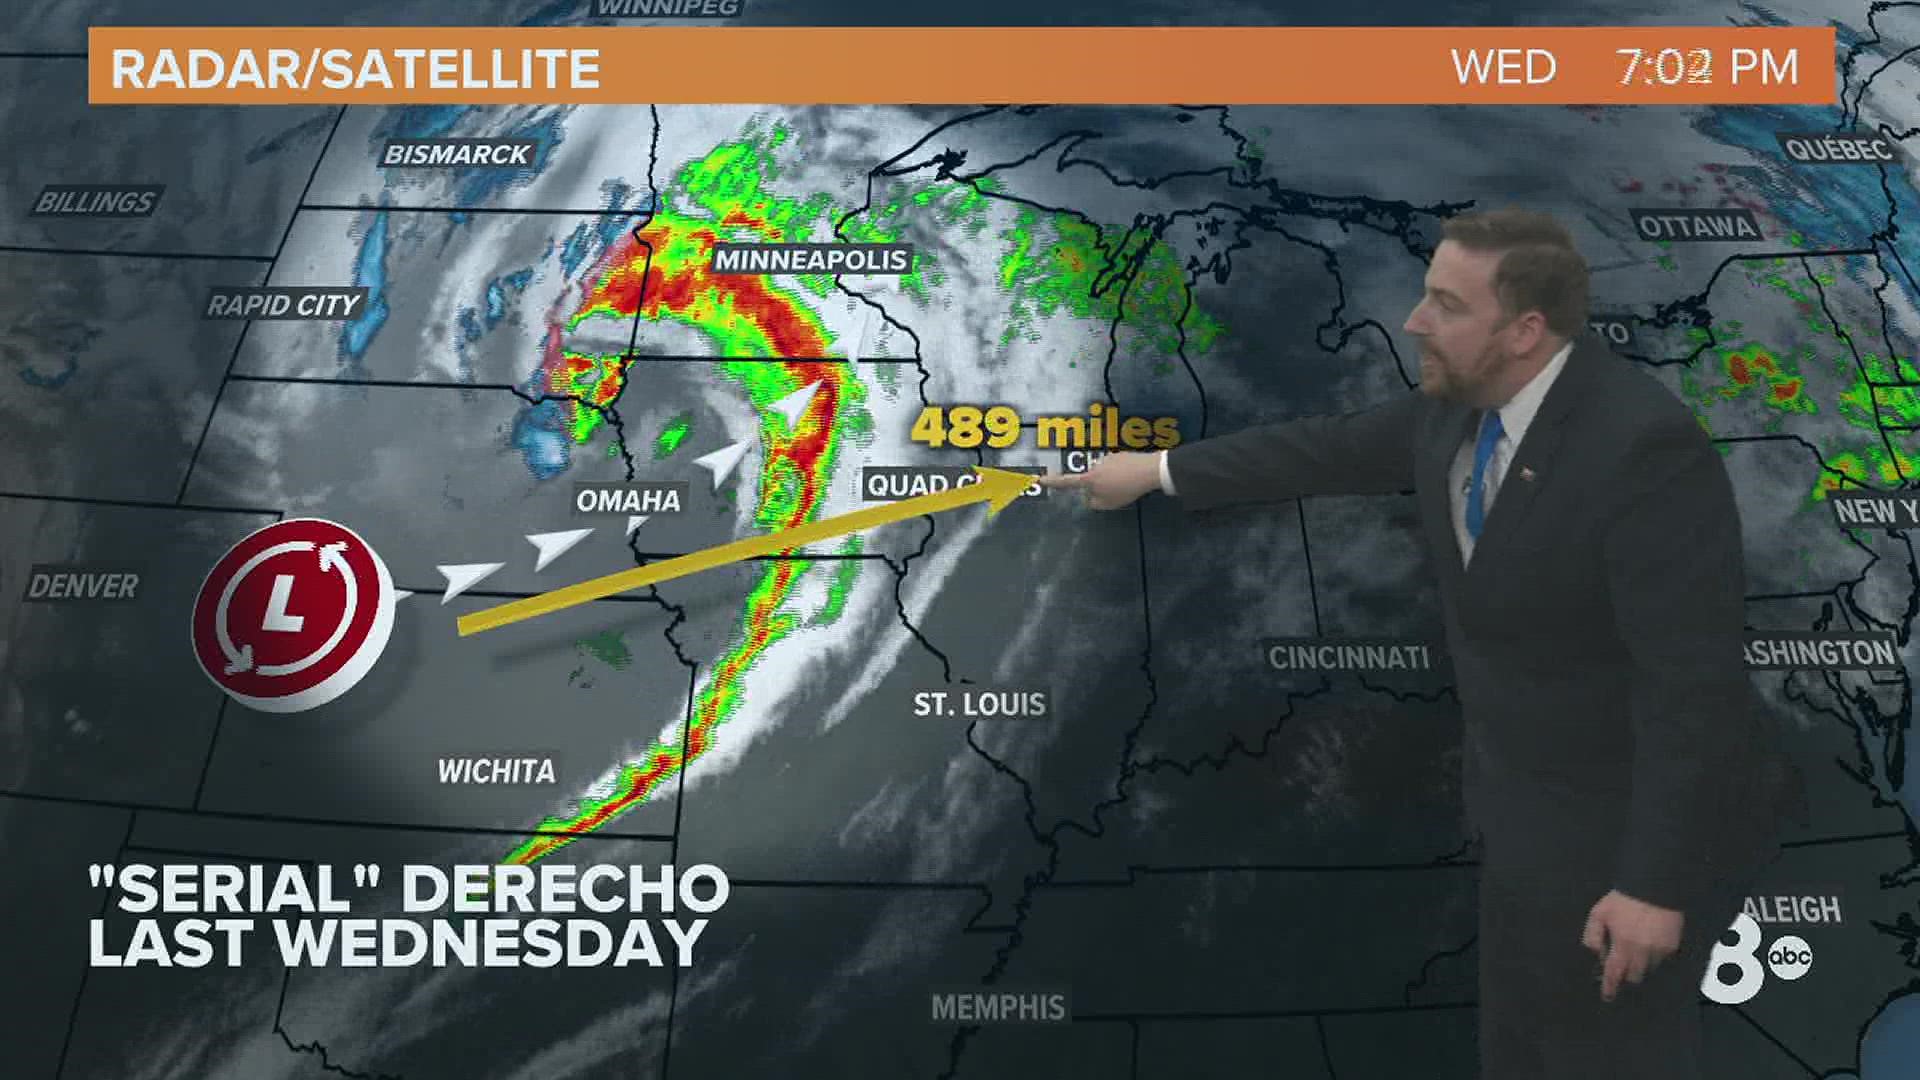 A "Serial" Derecho broke records across the Midwest on December 15th, including the first-ever derecho recorded in the United States during the month of December.